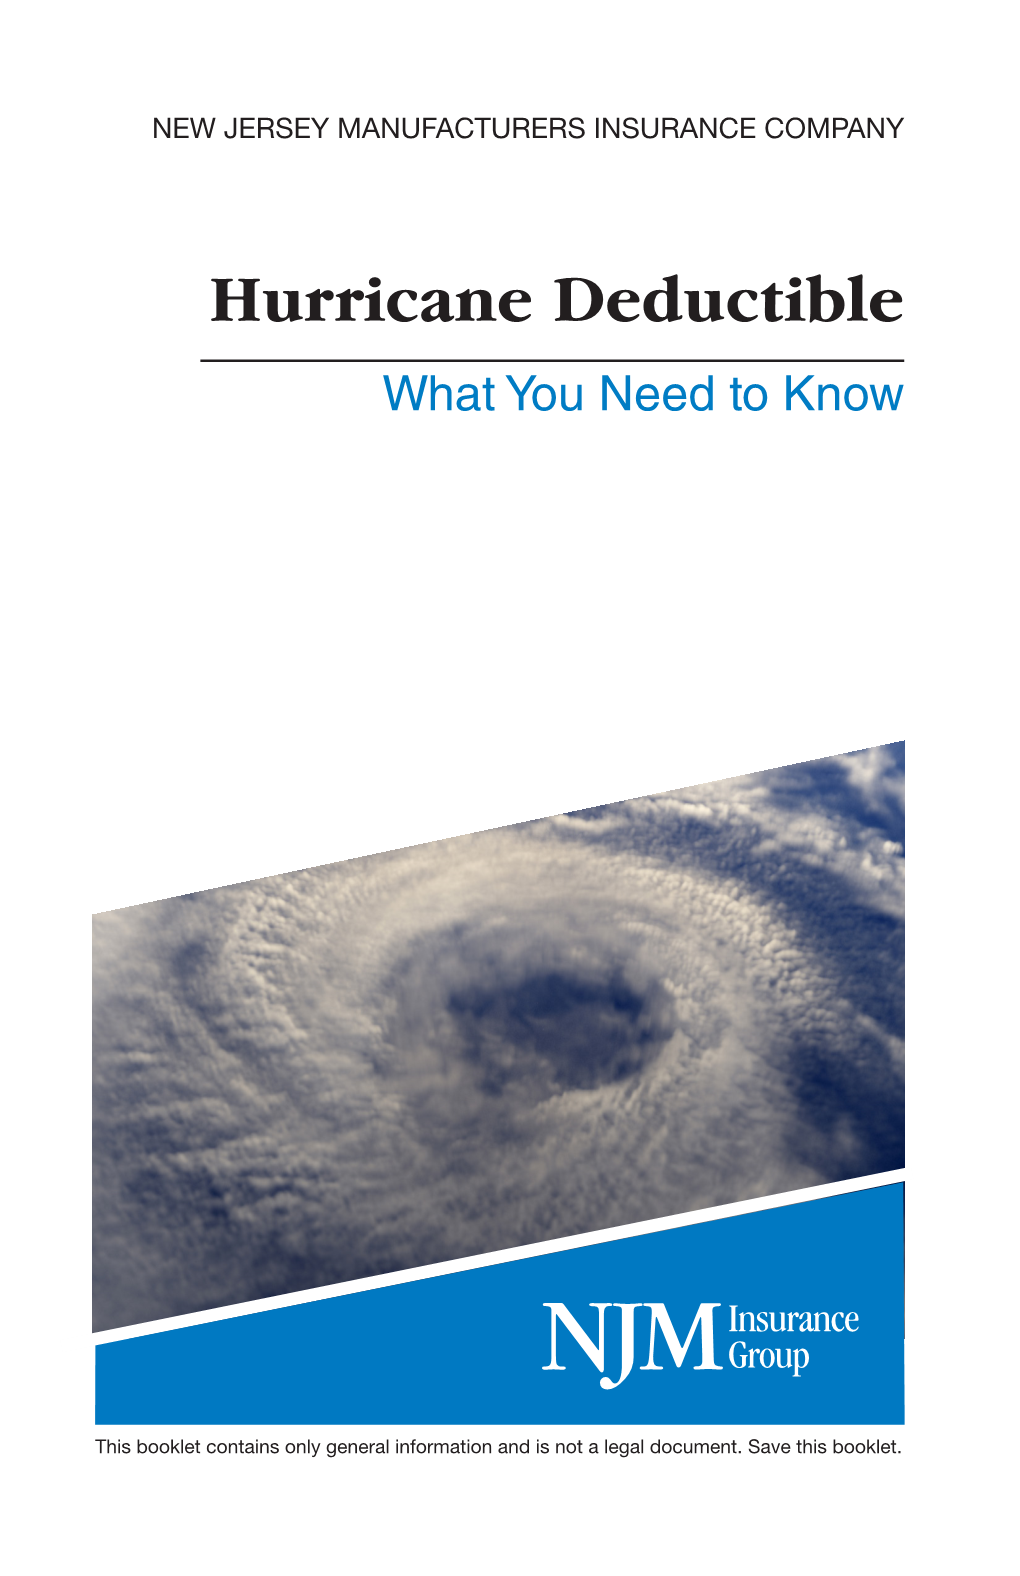 Hurricane Deductible What You Need to Know